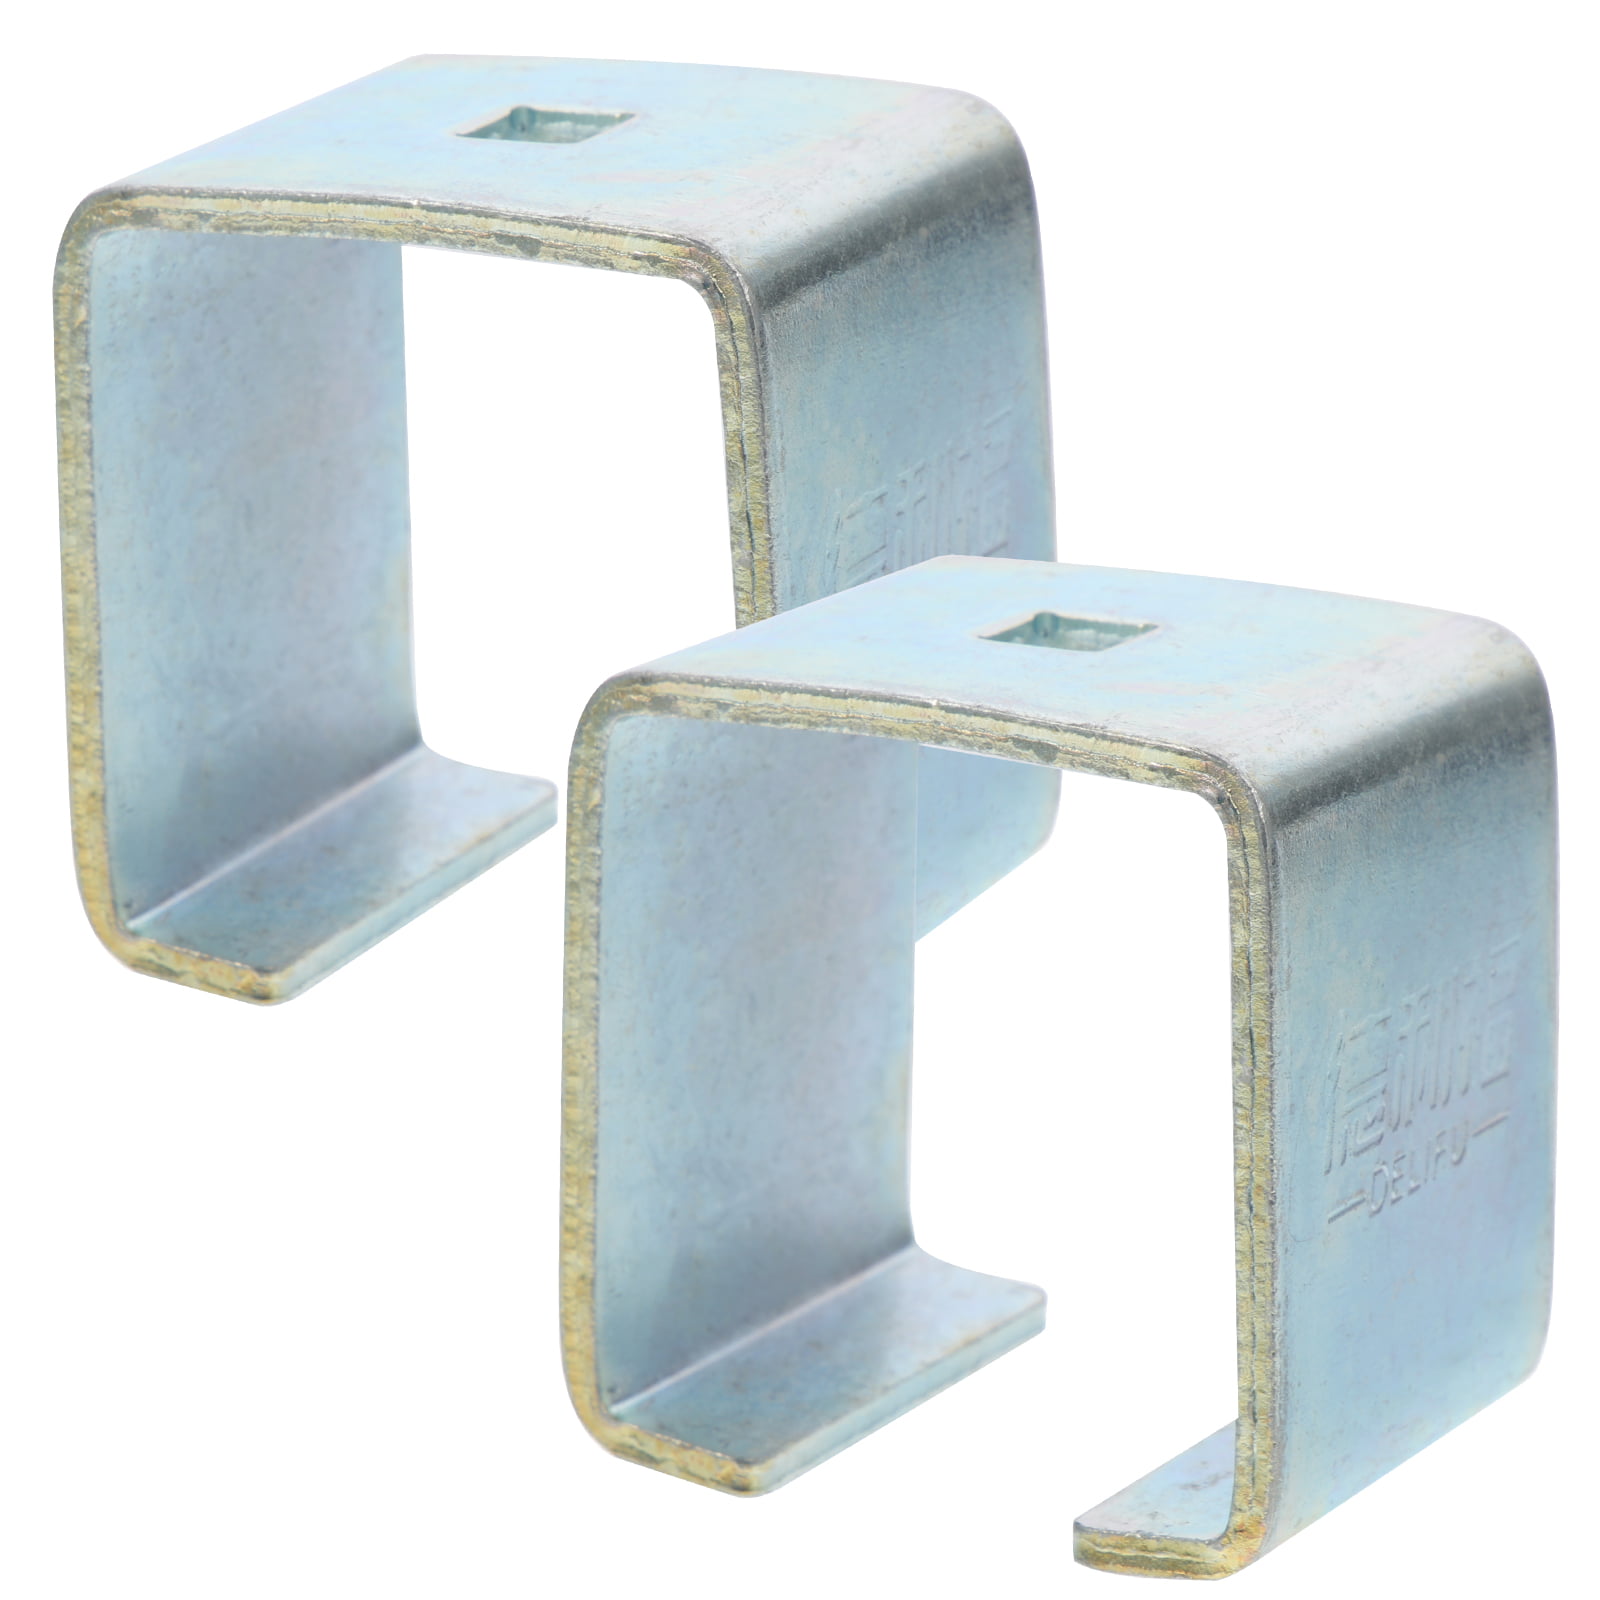 Troemner Talboys Support Plates Square; Large:Clamps and Supports,  Quantity